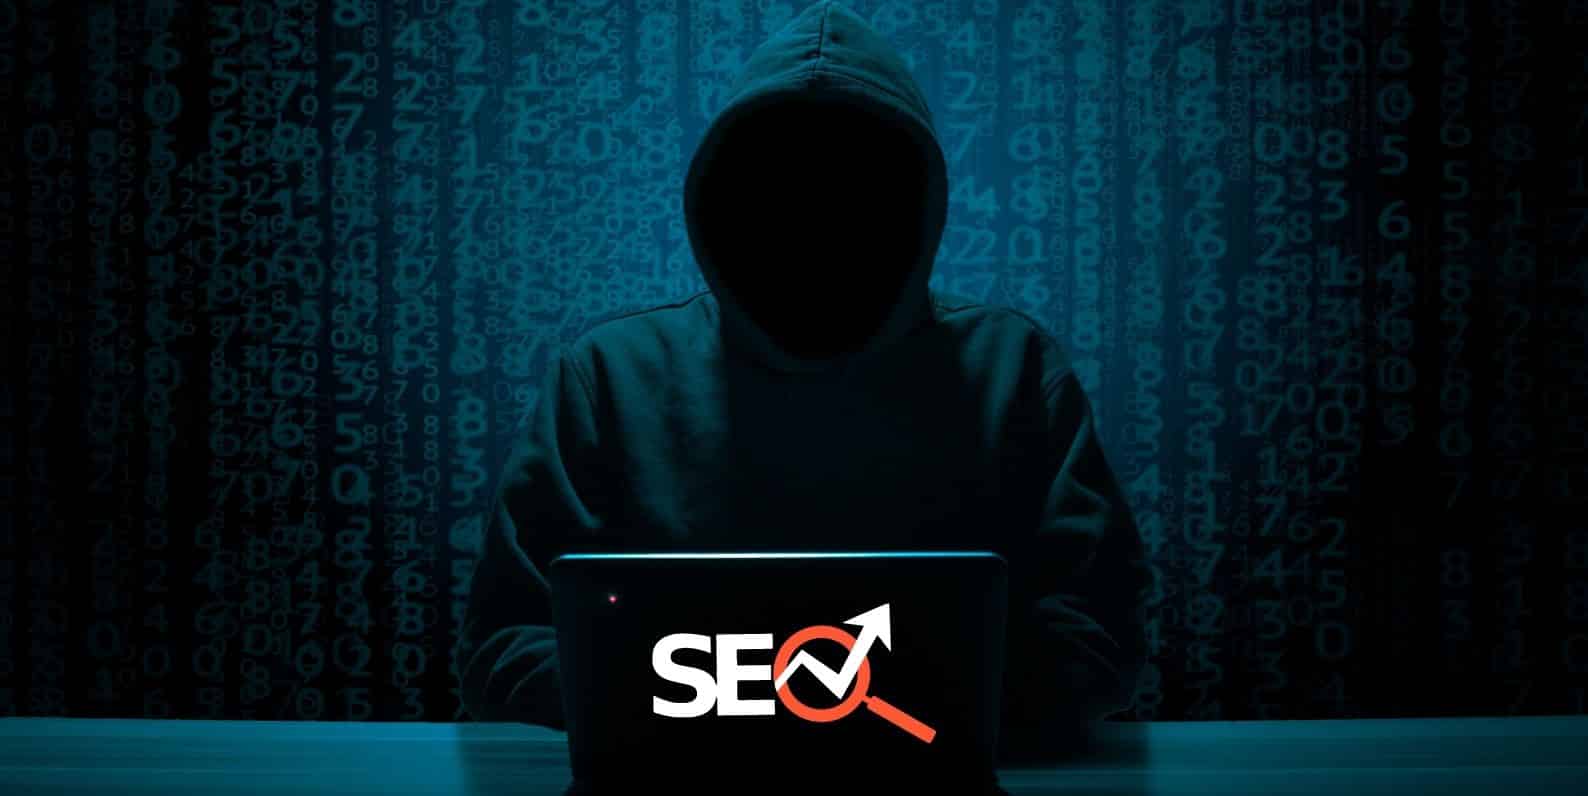 Black Hat SEO: Techniques & Reasons to Avoid